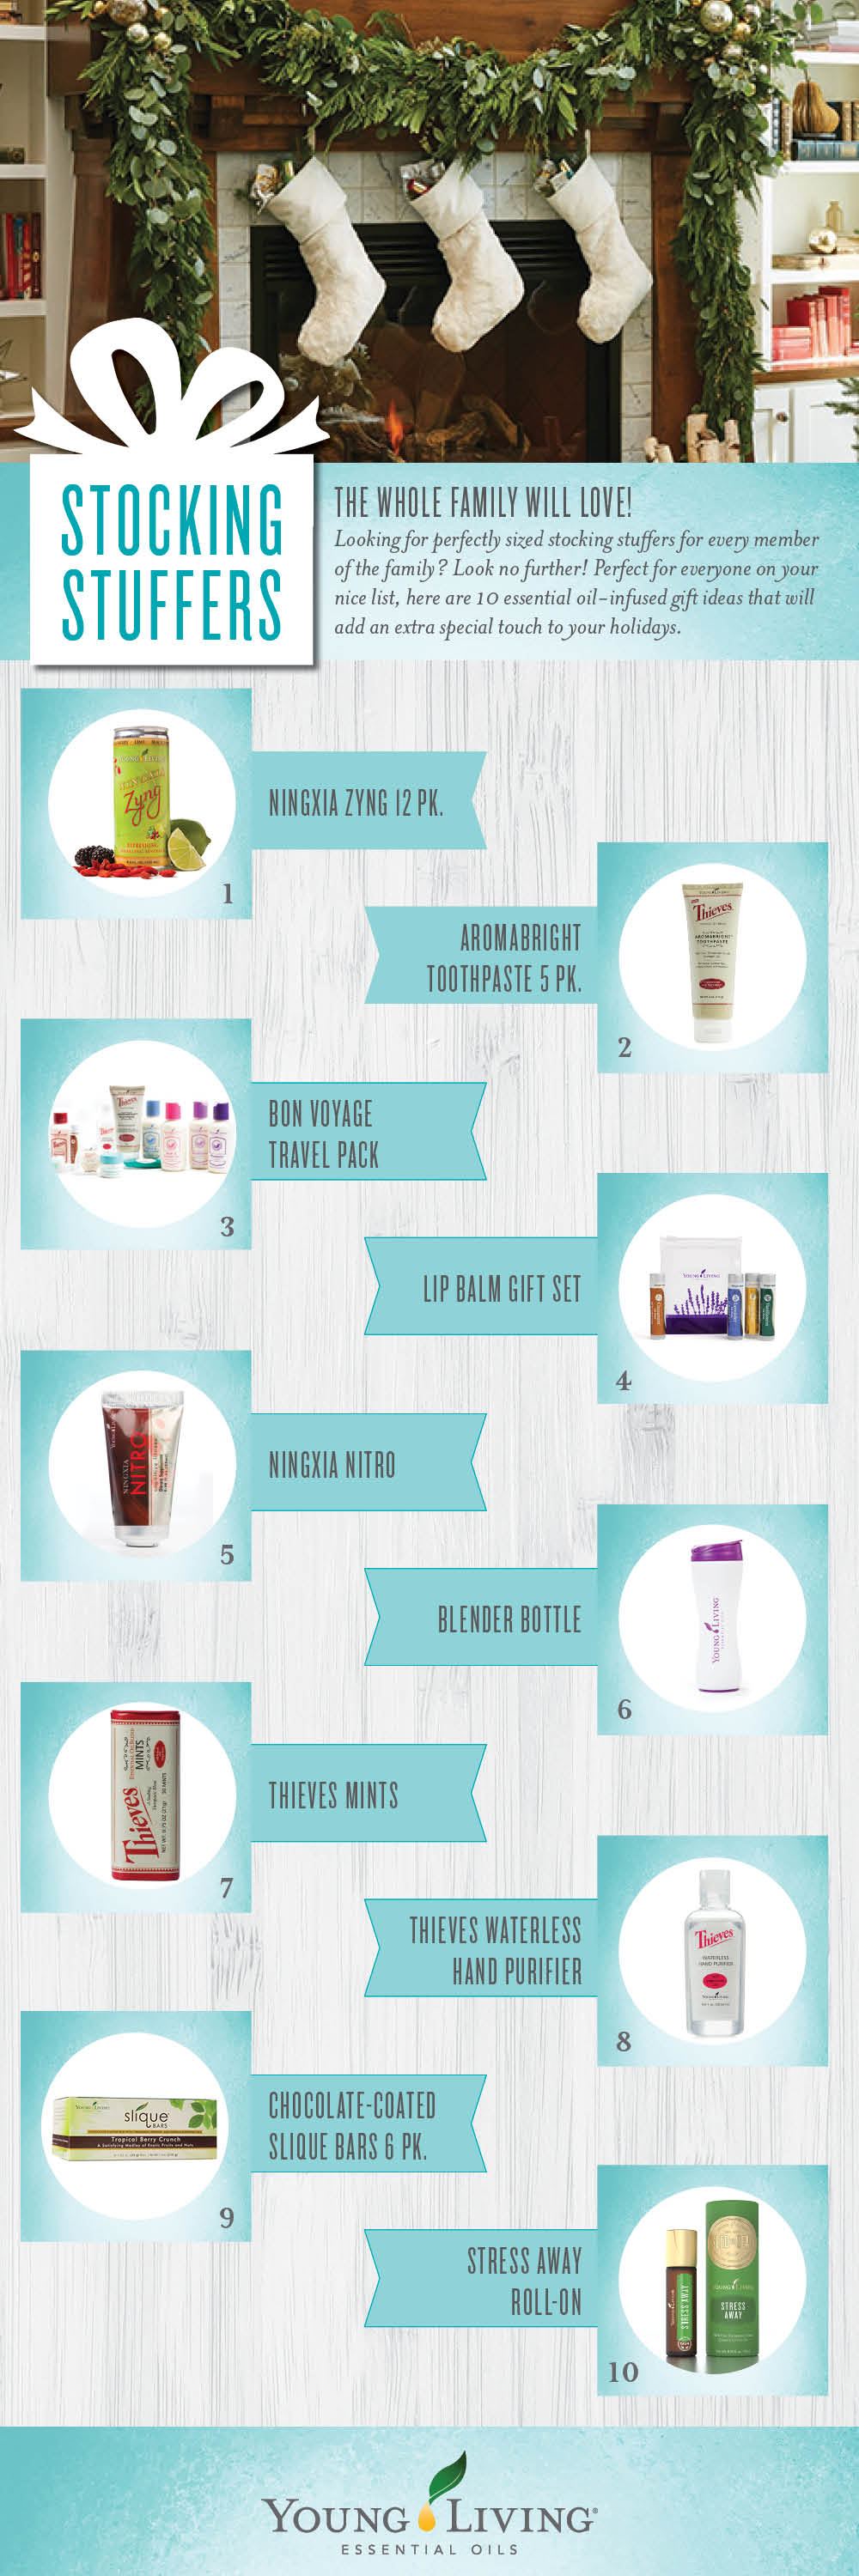 Young Living stocking stuffer ideas - Black Pepper, Blender Bottle, Chocolate-Coated Slique Bars, Copaiba, Lime, NingXia Nitro, NingXia Zyng, Orange, Stress Away, Thieves Mints, Thieves AromaBright Toothpaste, Bon Voyage Travel Pack, Lip Balm Gift Set, Thieves Waterless Hand Purifier, Stress Away Roll On